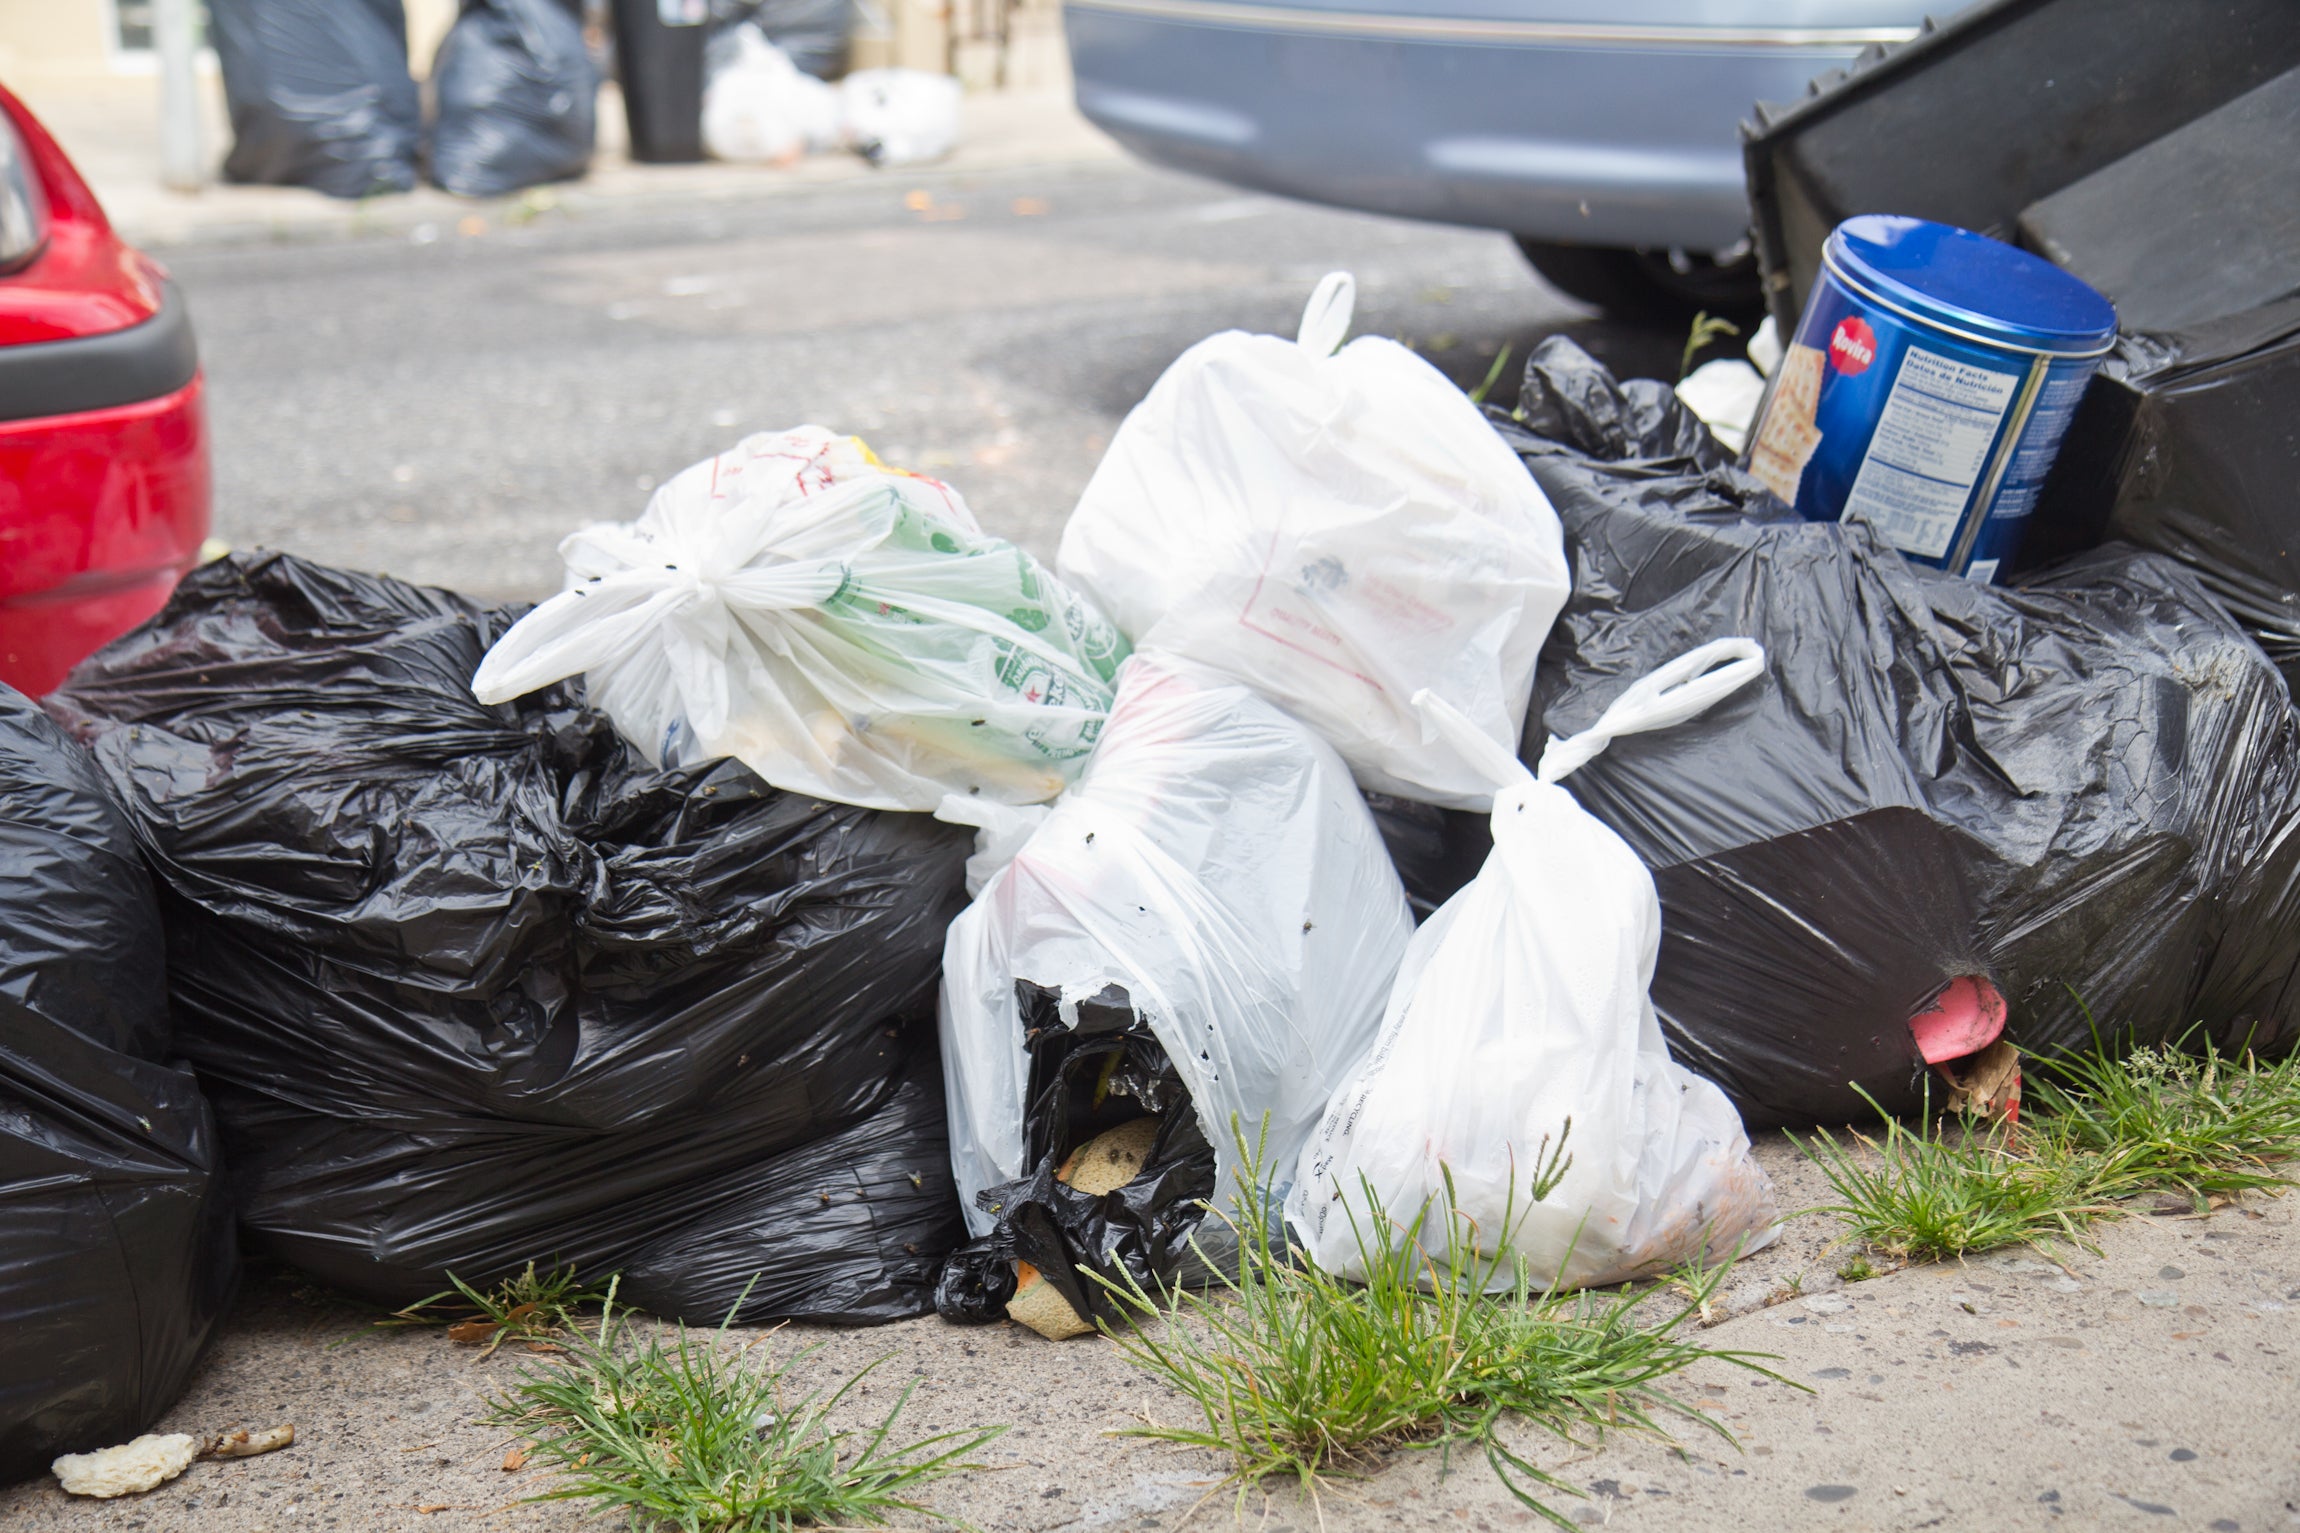 Philly sanitation workers blame filthy streets on city 'management